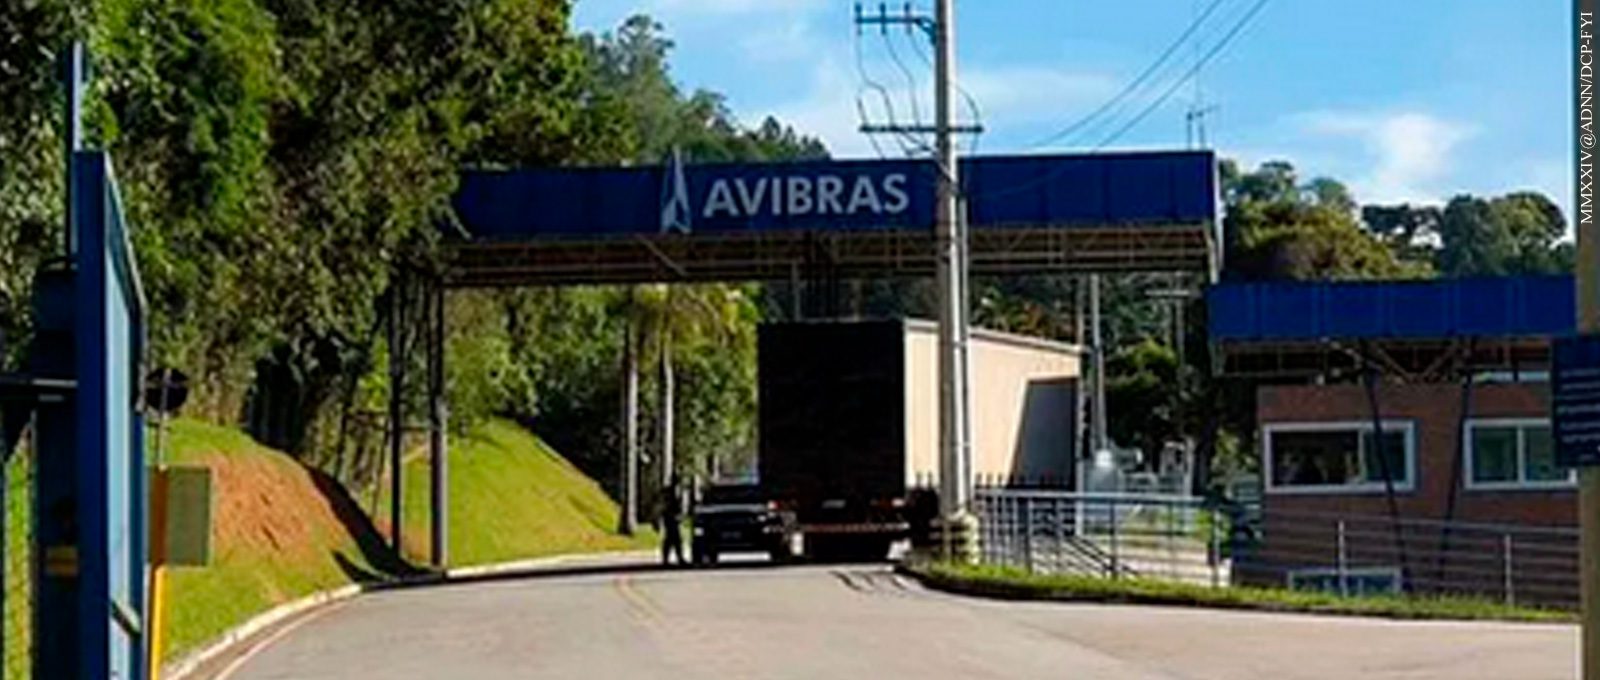 Sale of Avibras to Australian group is an attack on Brazil's national sovereignty